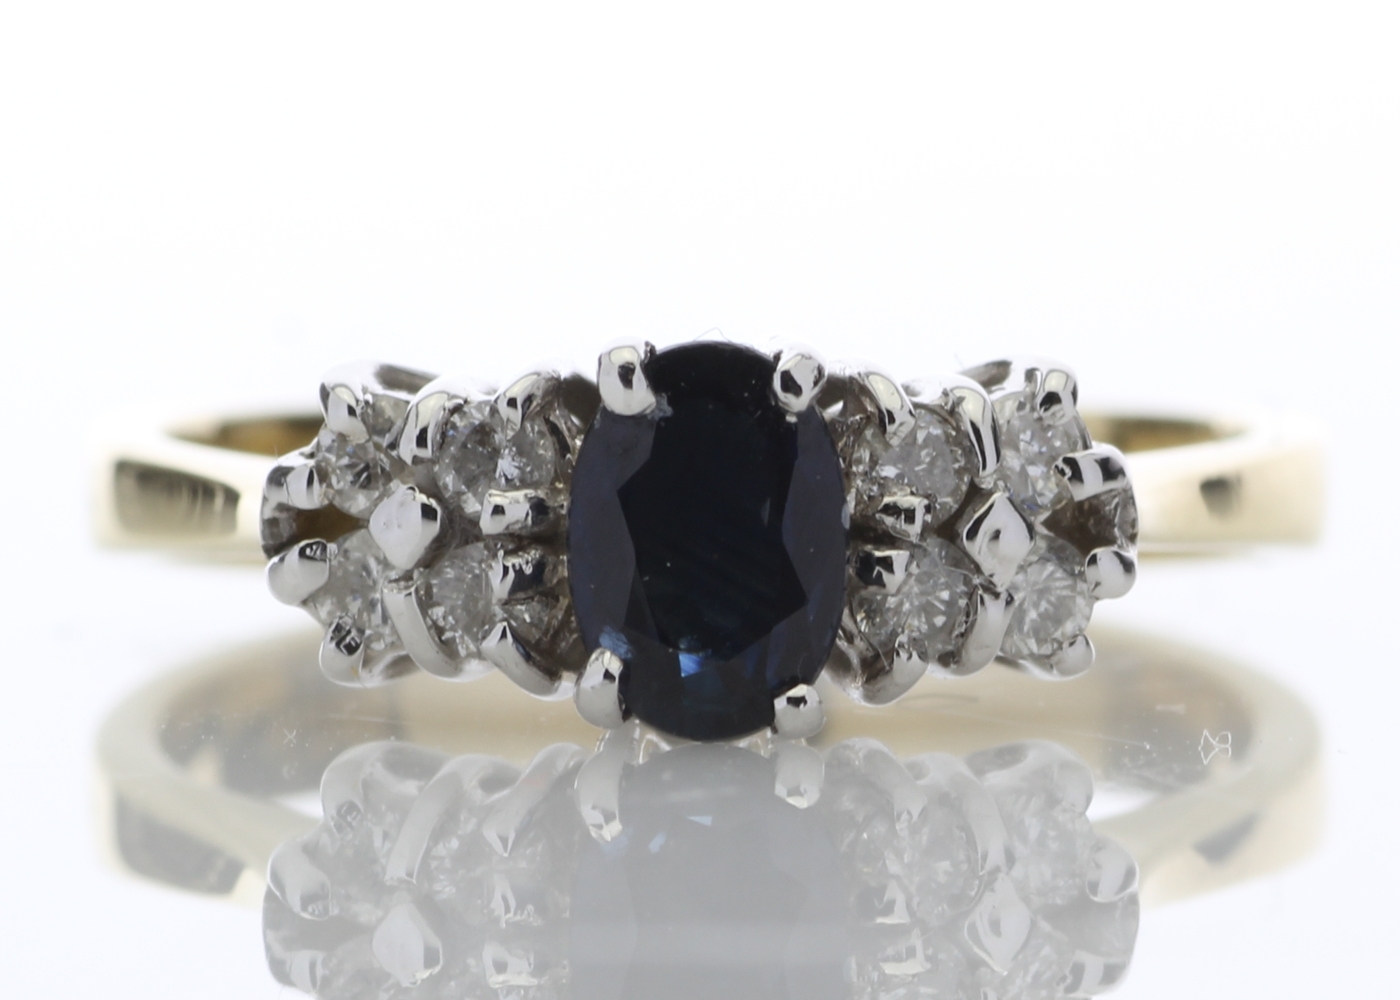 18ct Boat Shape Cluster Diamond Saphire Ring 0.50 Carats - Valued By IDI £3,900.00 - A beautiful